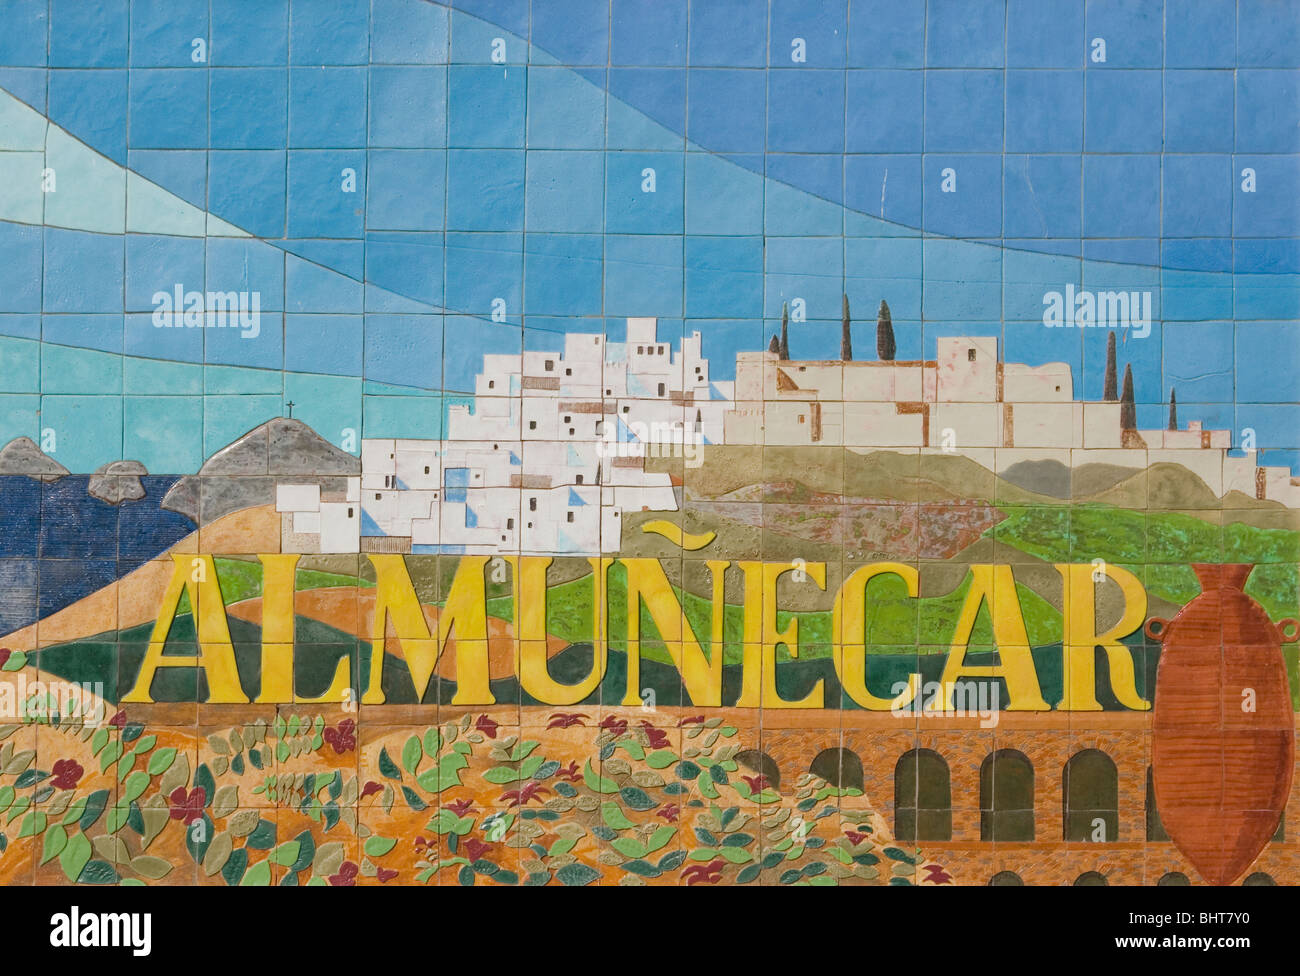 Ceramic tiles at the entrance to Almuñecar, Costa Tropical, Spain. Stock Photo